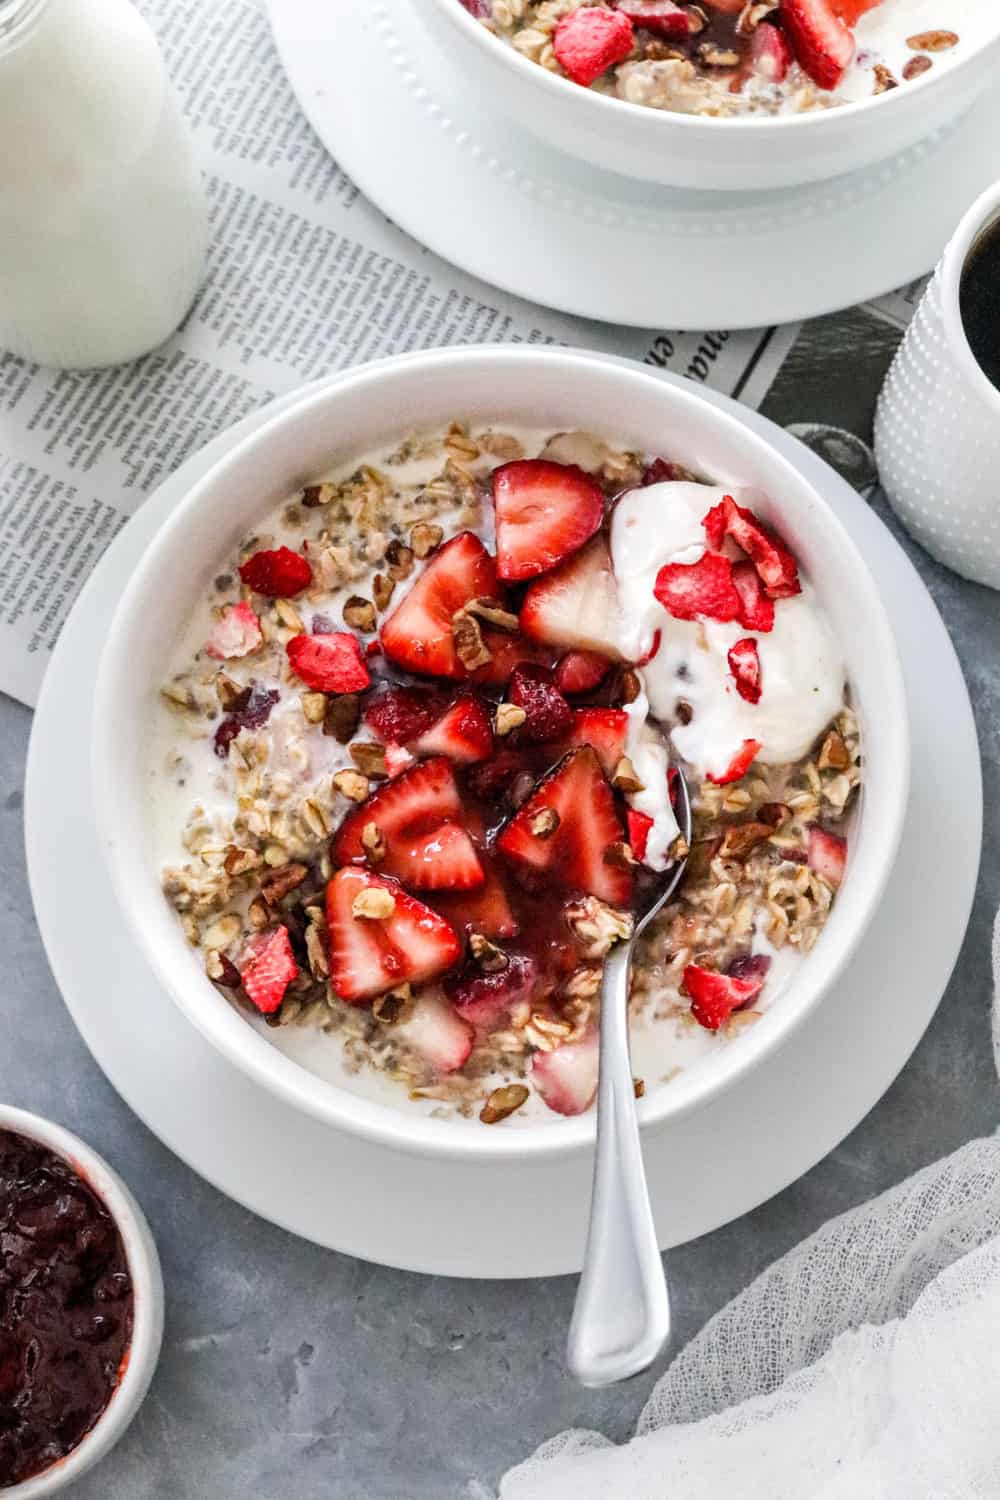 Round white bowl filled with creamy oats topped with sliced strawberries, yogurt and chopped nuts with a spoon in the bowl and another bowl of oats behind it